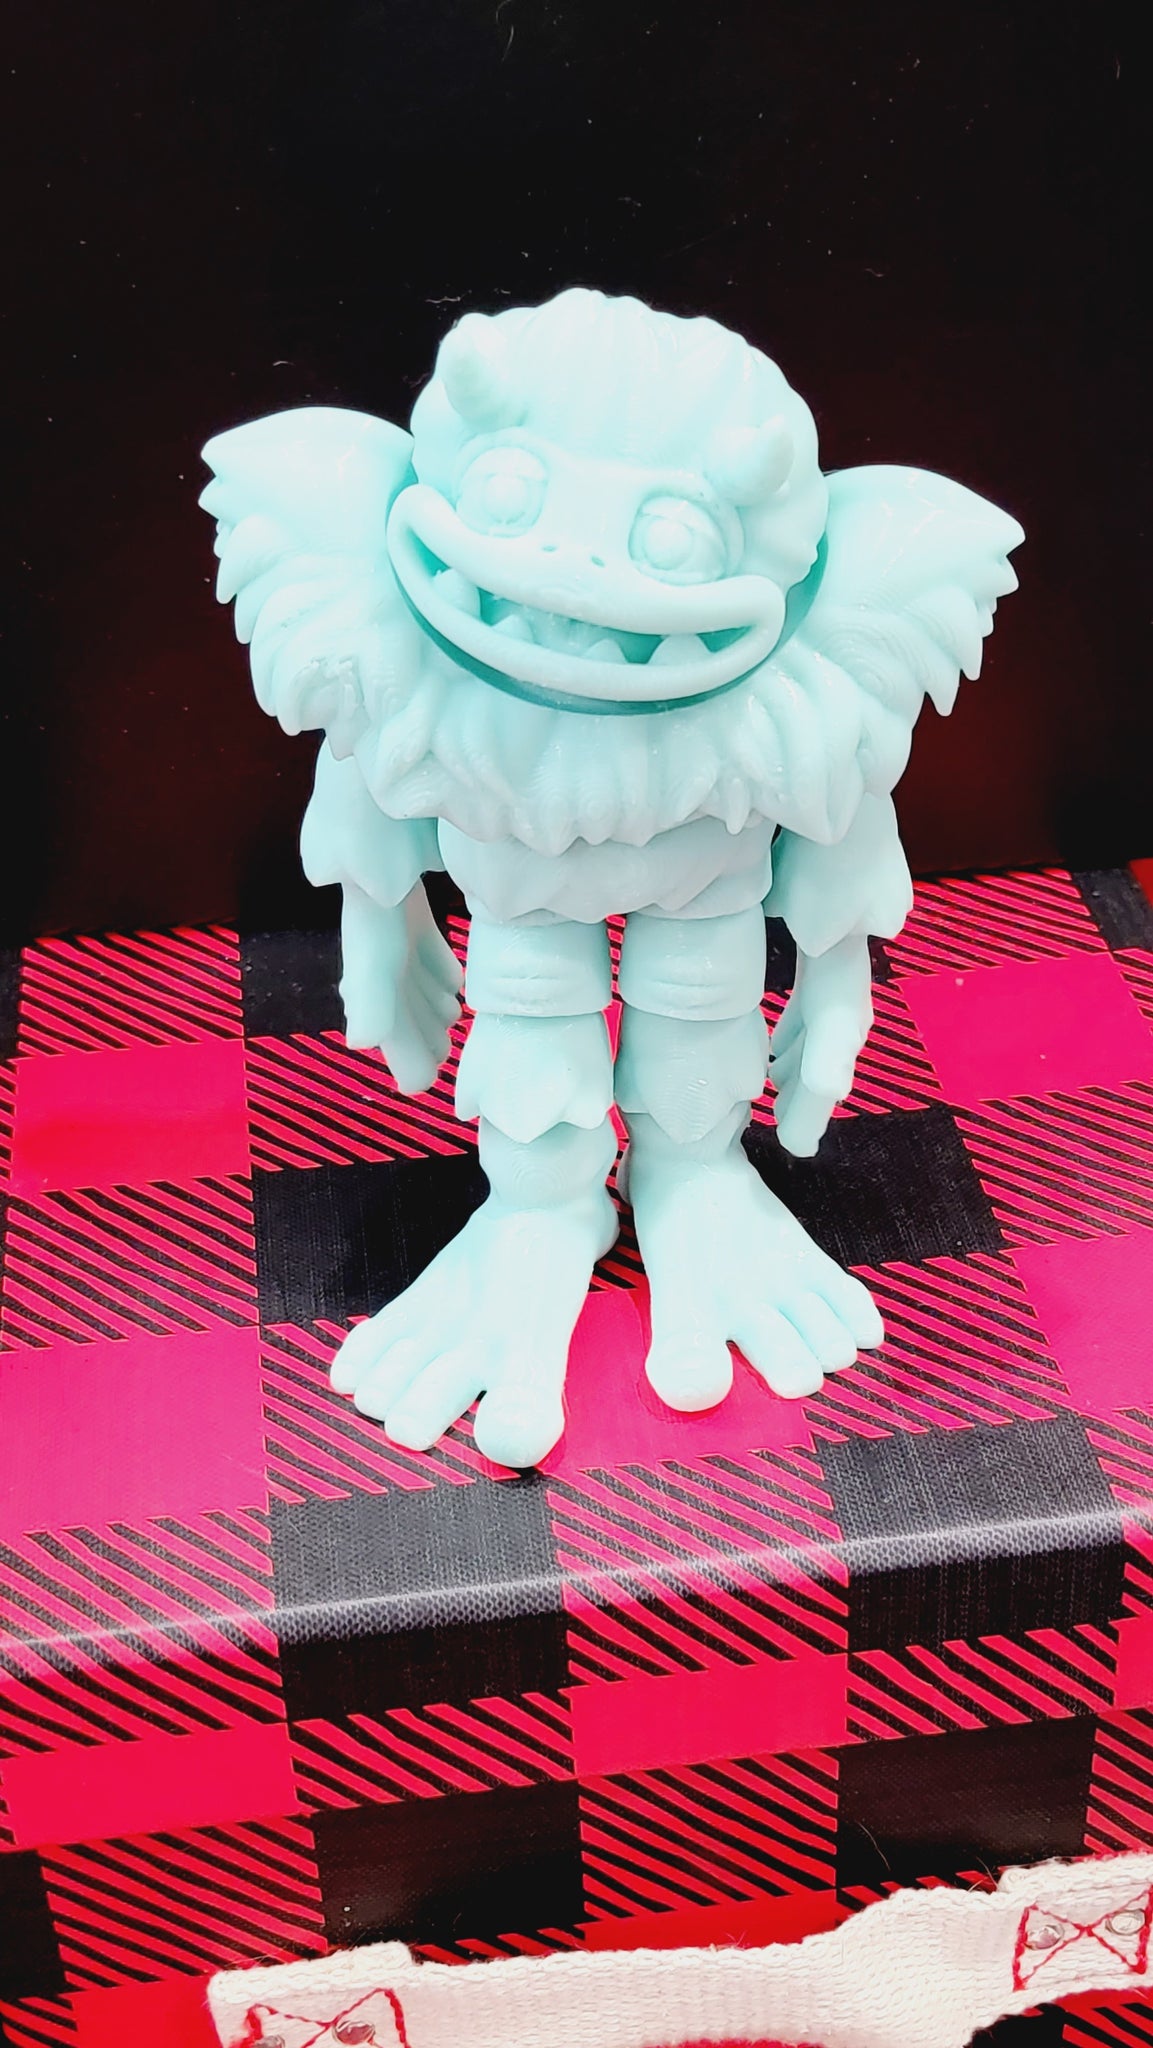 Yeti Holiday Monster - Movable 3D Critters FUR A CAUSE 3D Print FREE Shipping - Your purchase is a Donation to a Charity in Need